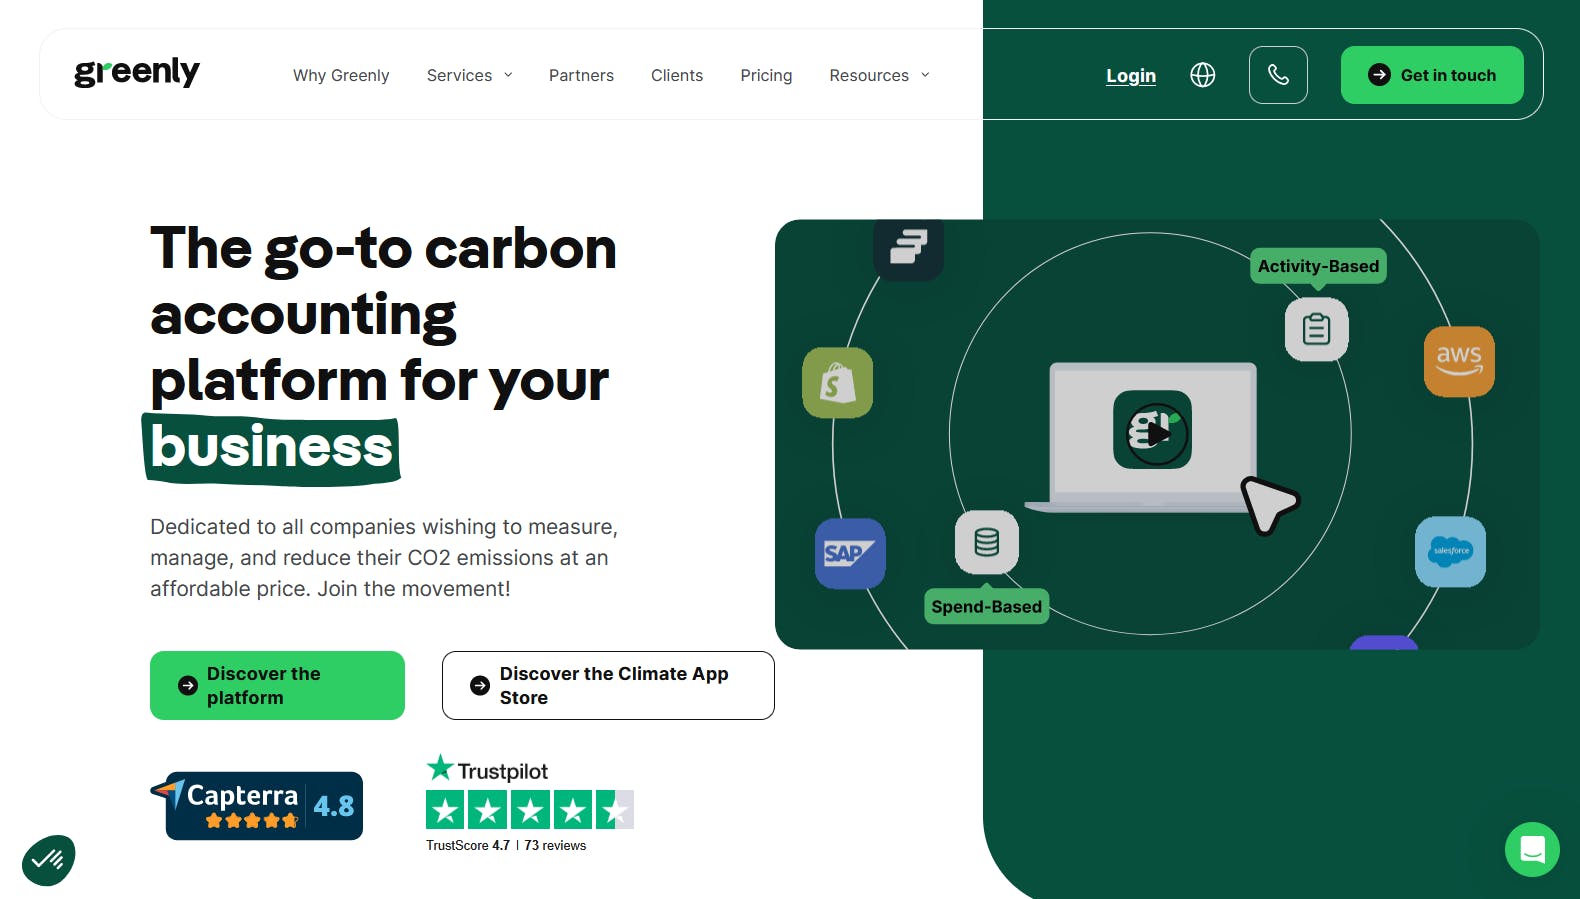 Greenly Website Landing Pages built with Prismic